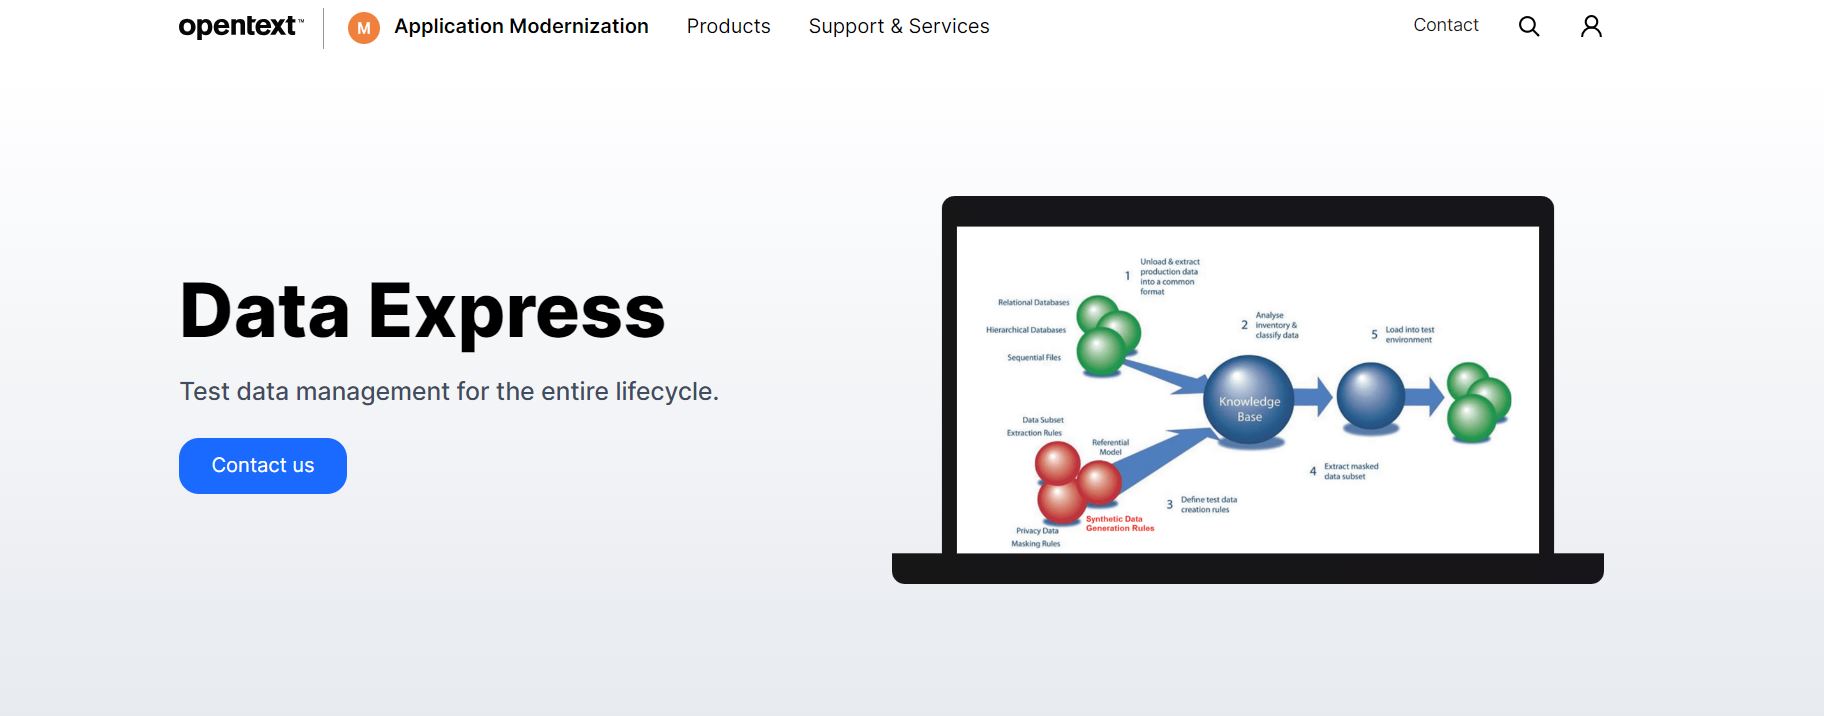 Image of Data Express management tool